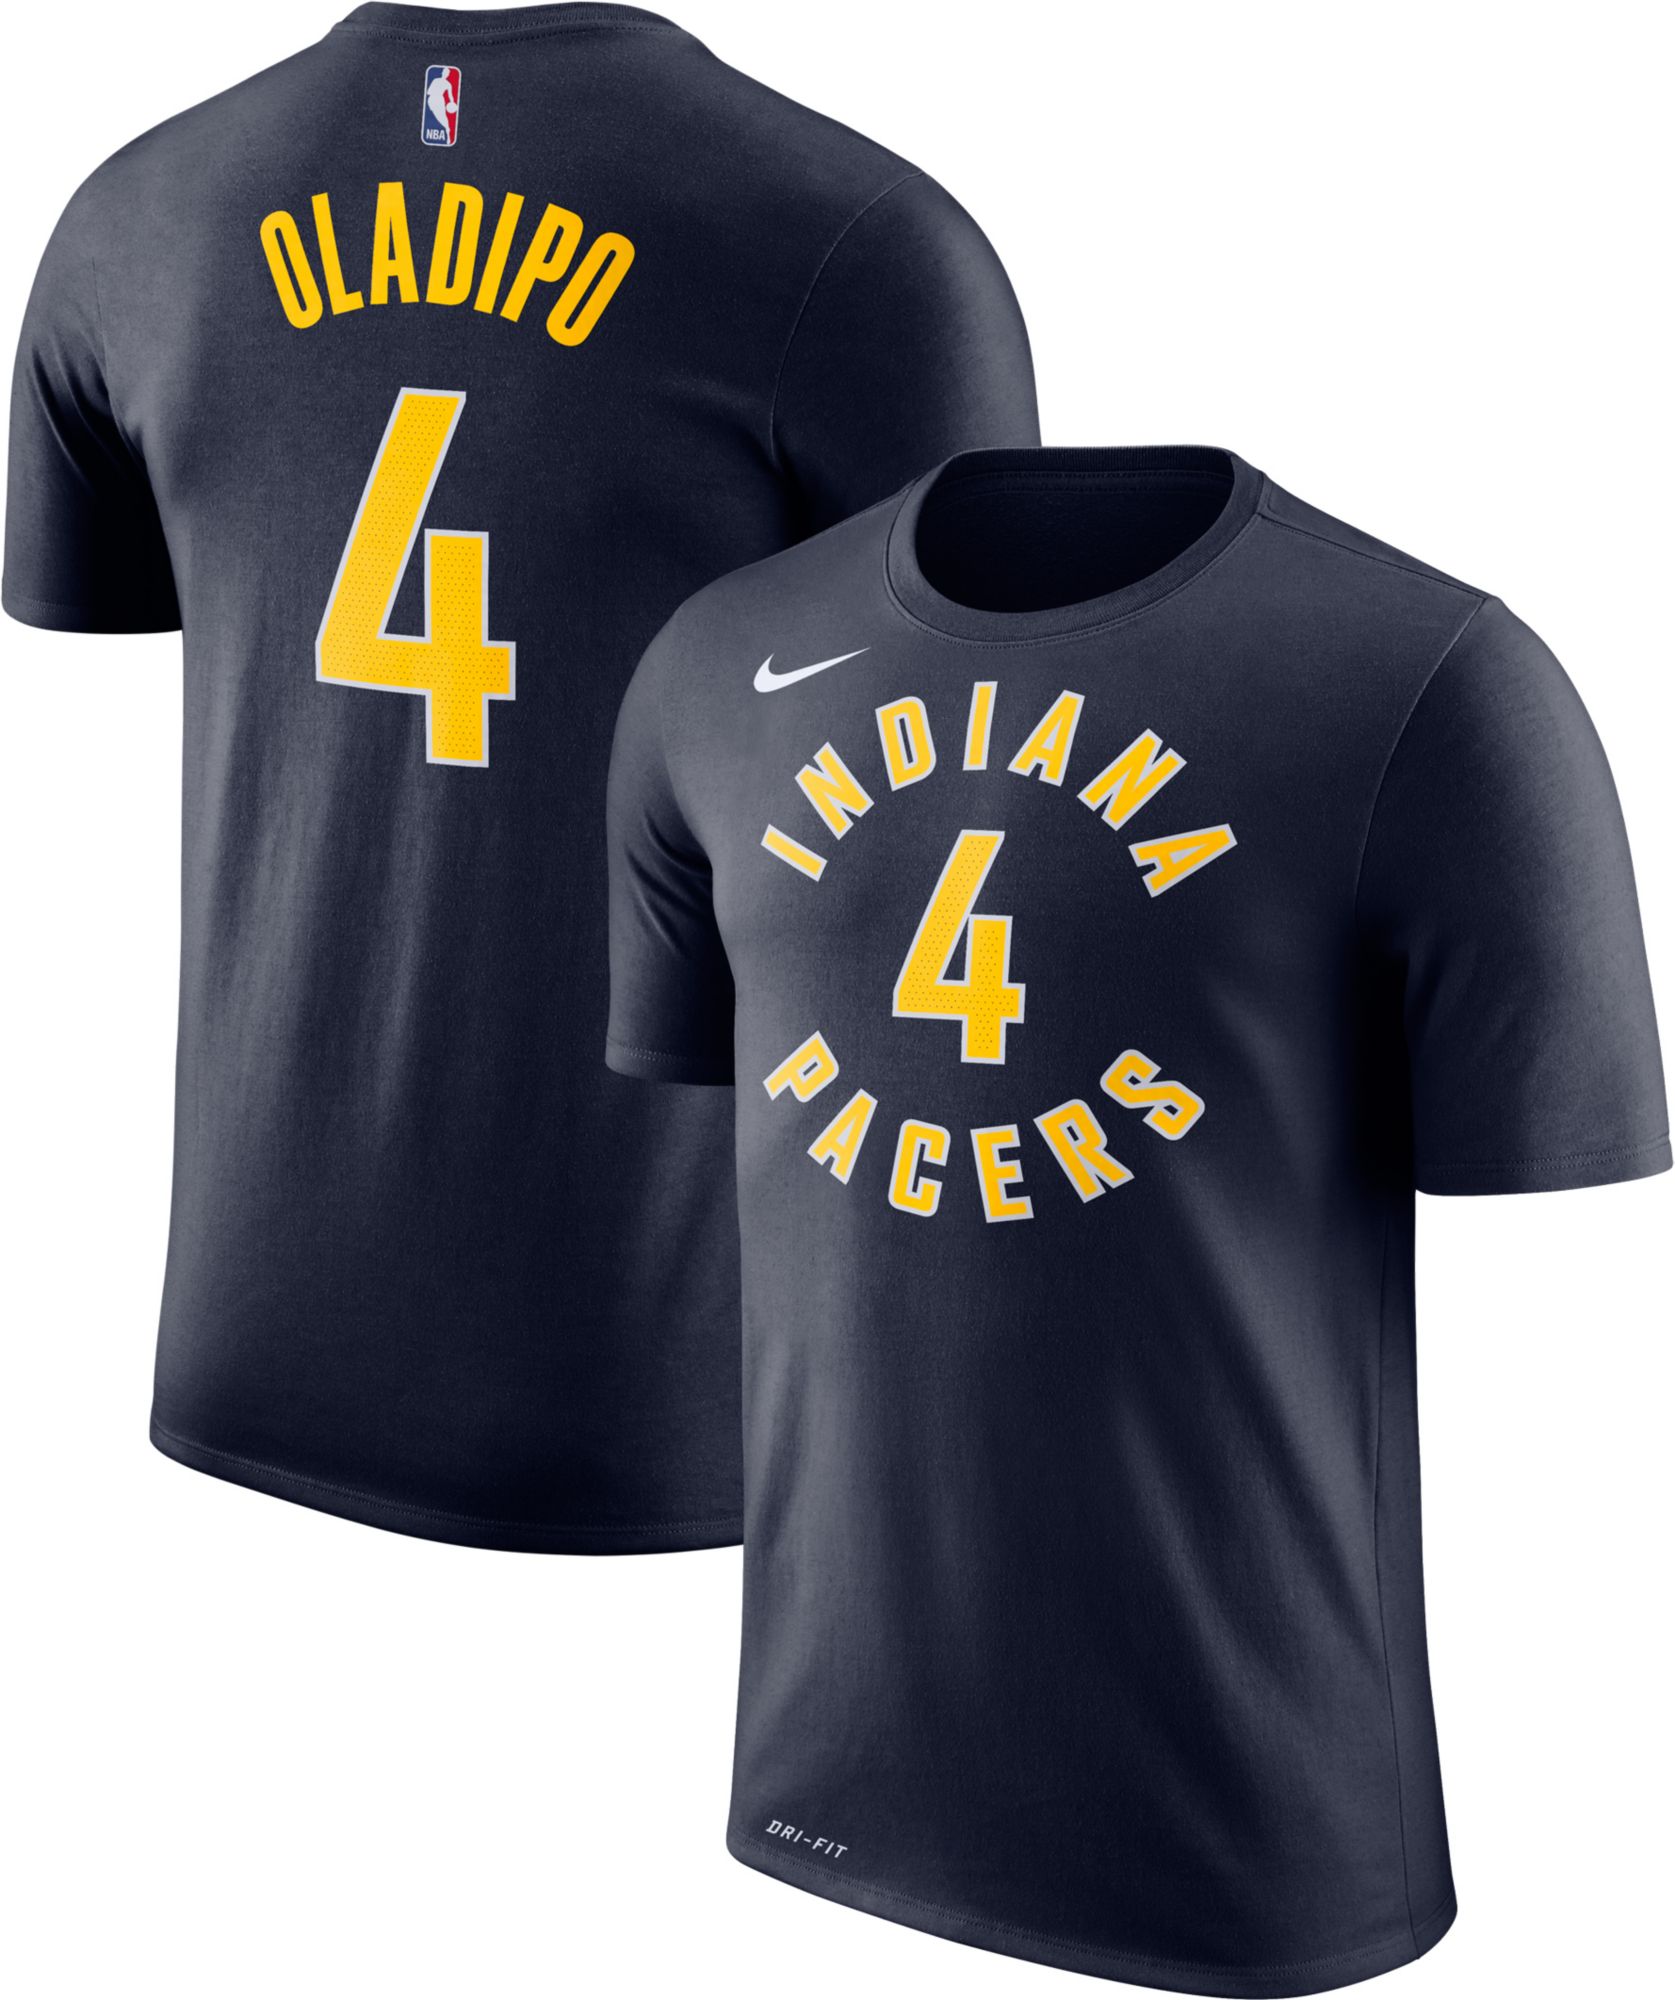 victor oladipo youth jersey